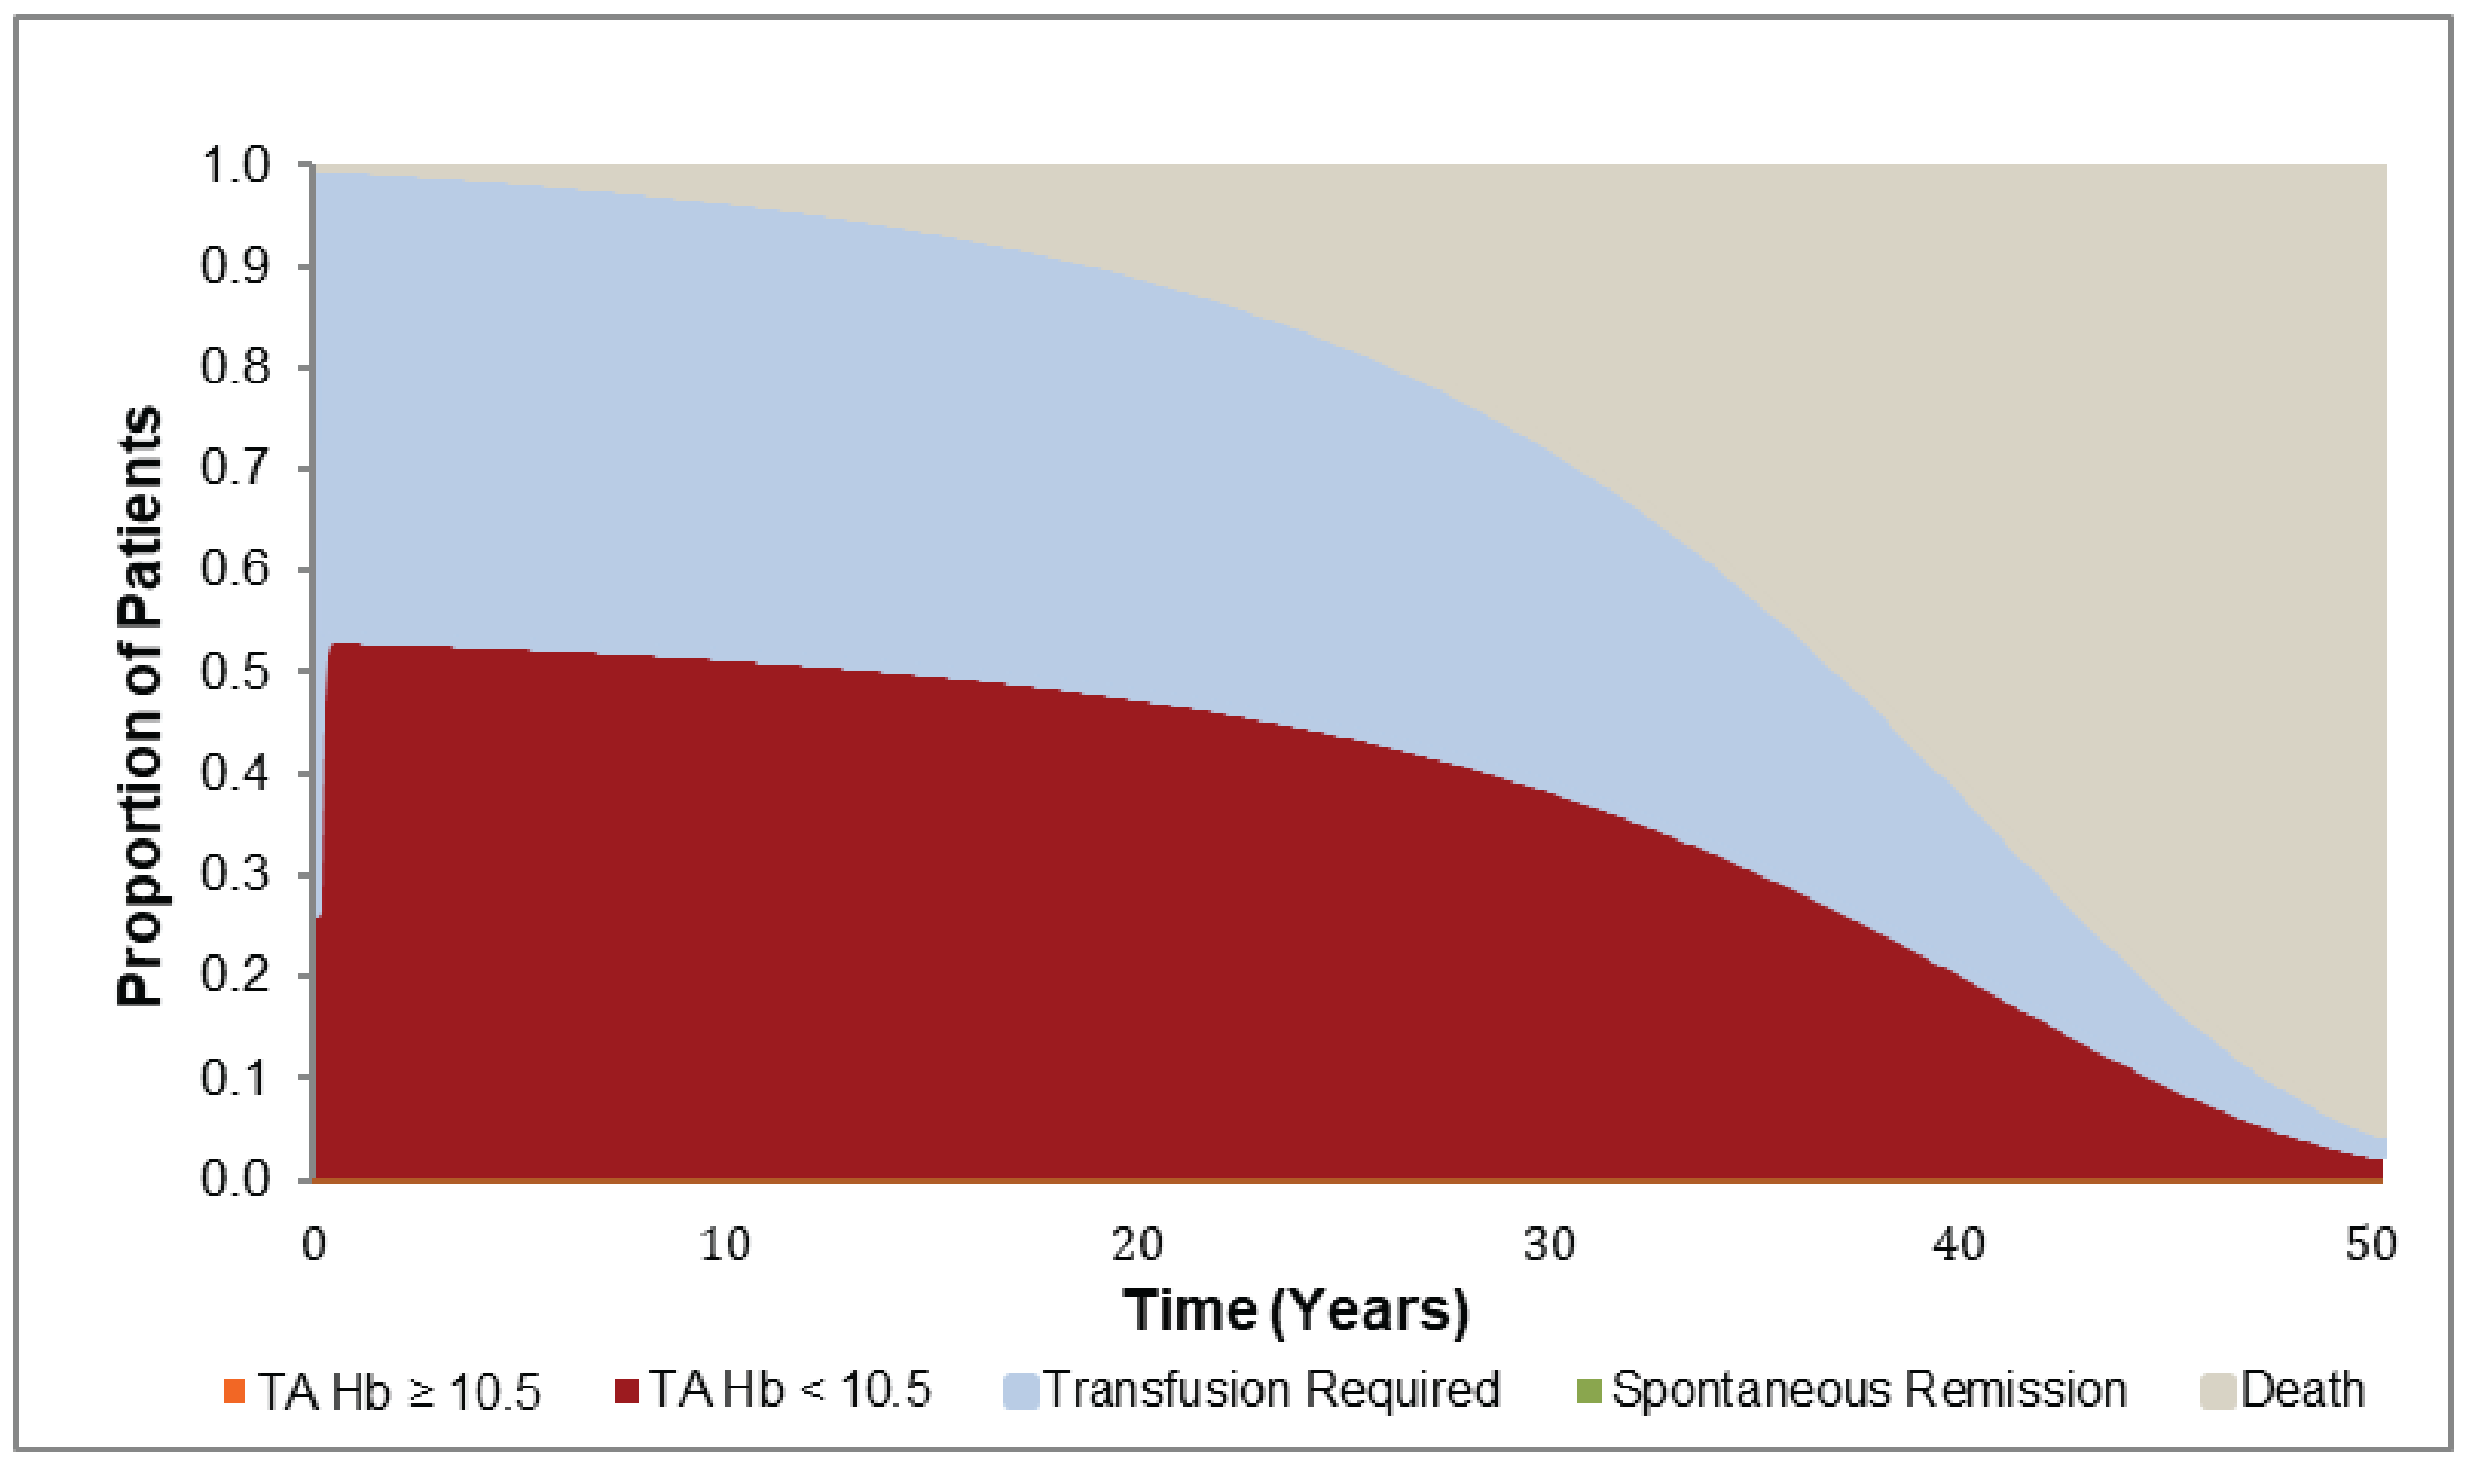 The figure shows the proportion of patients in each health state over the modelled time horizon. Majority of patients are in the TA Hb < 10.5 health state at the start of the model and, with time, a larger proportion of patients enter the death health.